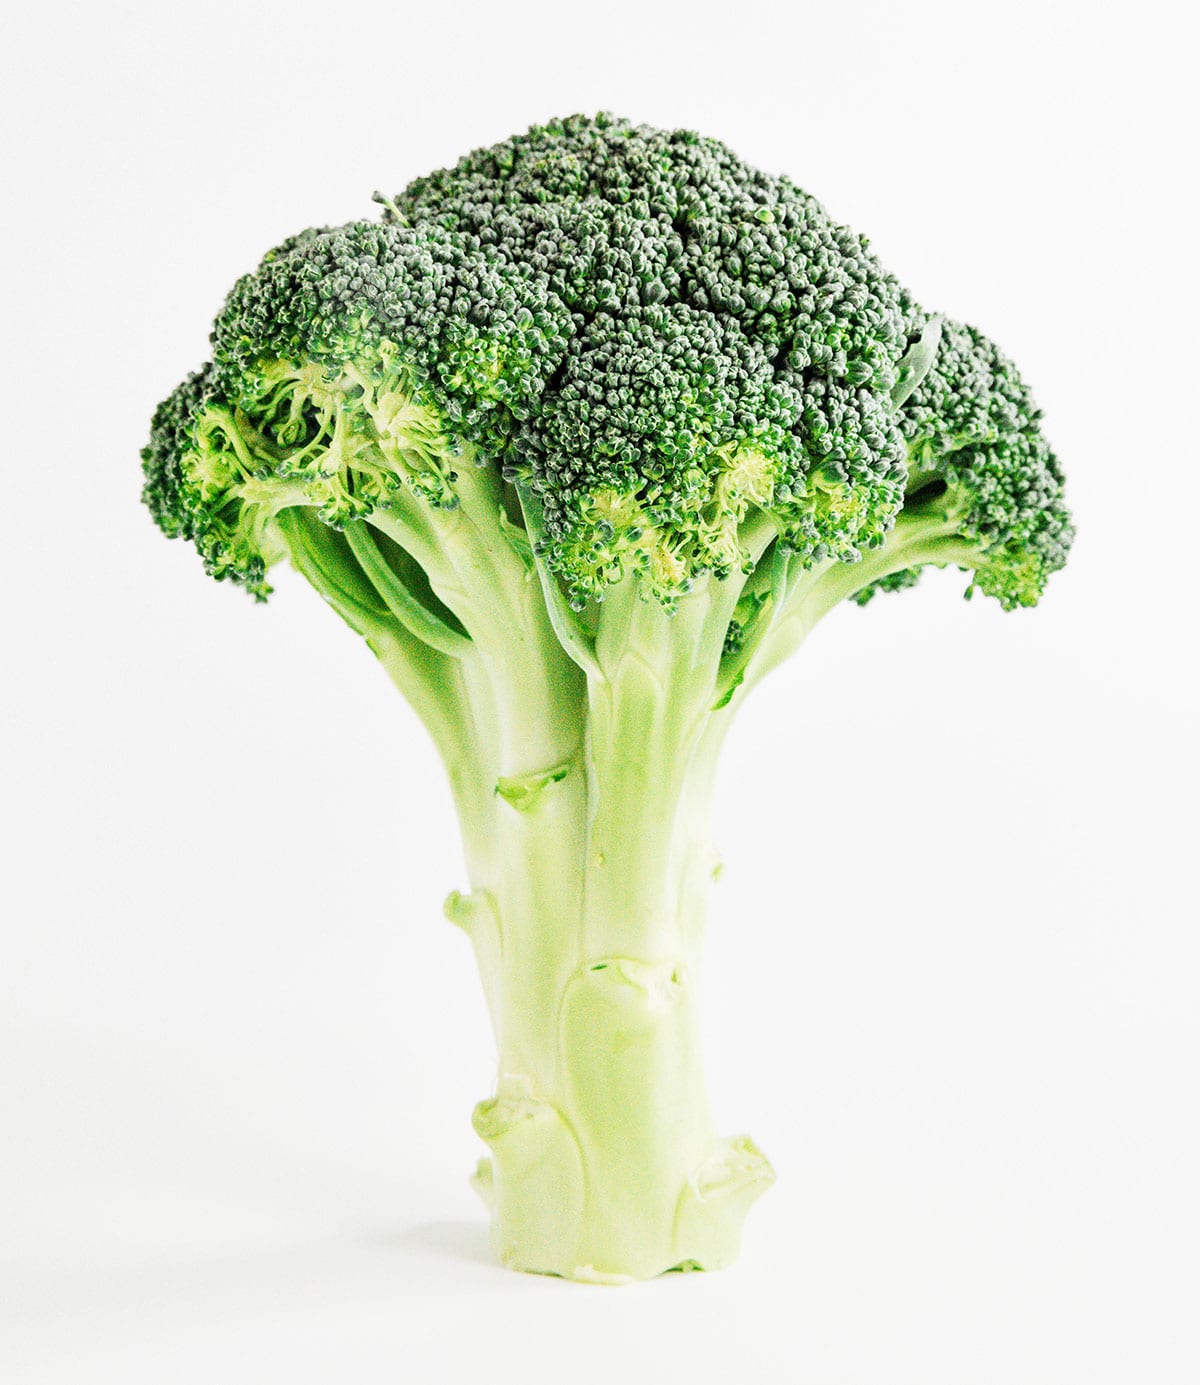 Broccoli standing upright on a white background